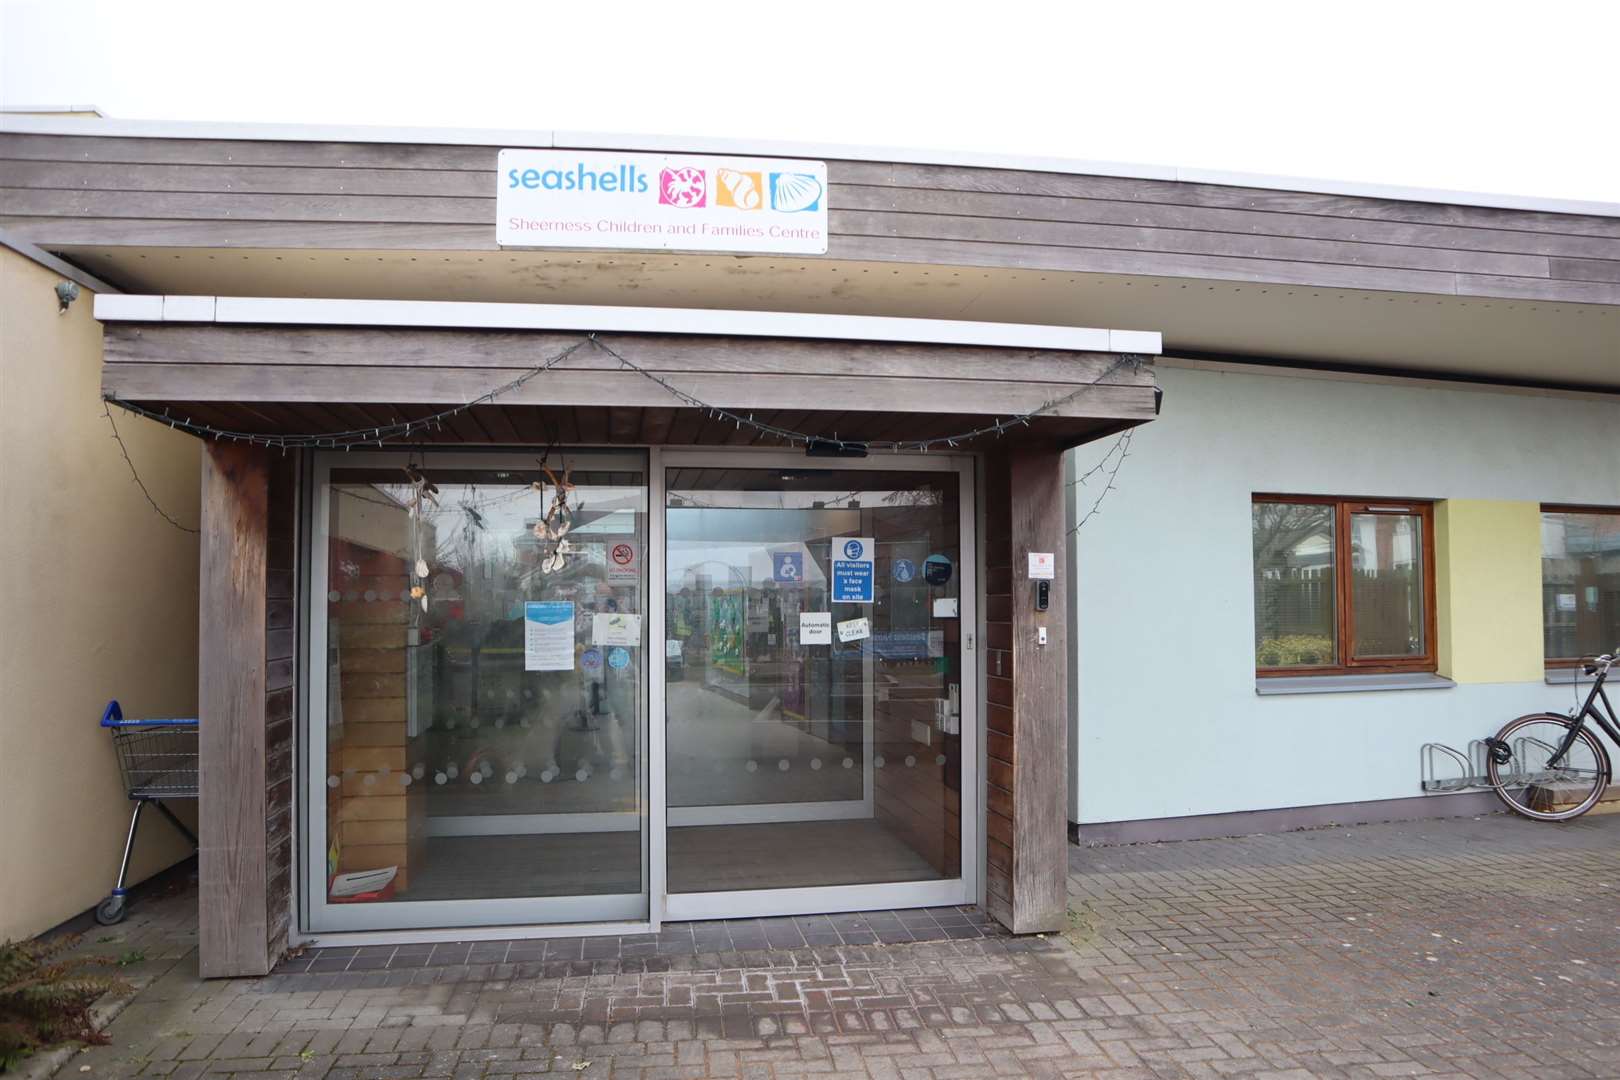 Entrance to Seashells children and families centre in Rose Street, Sheerness